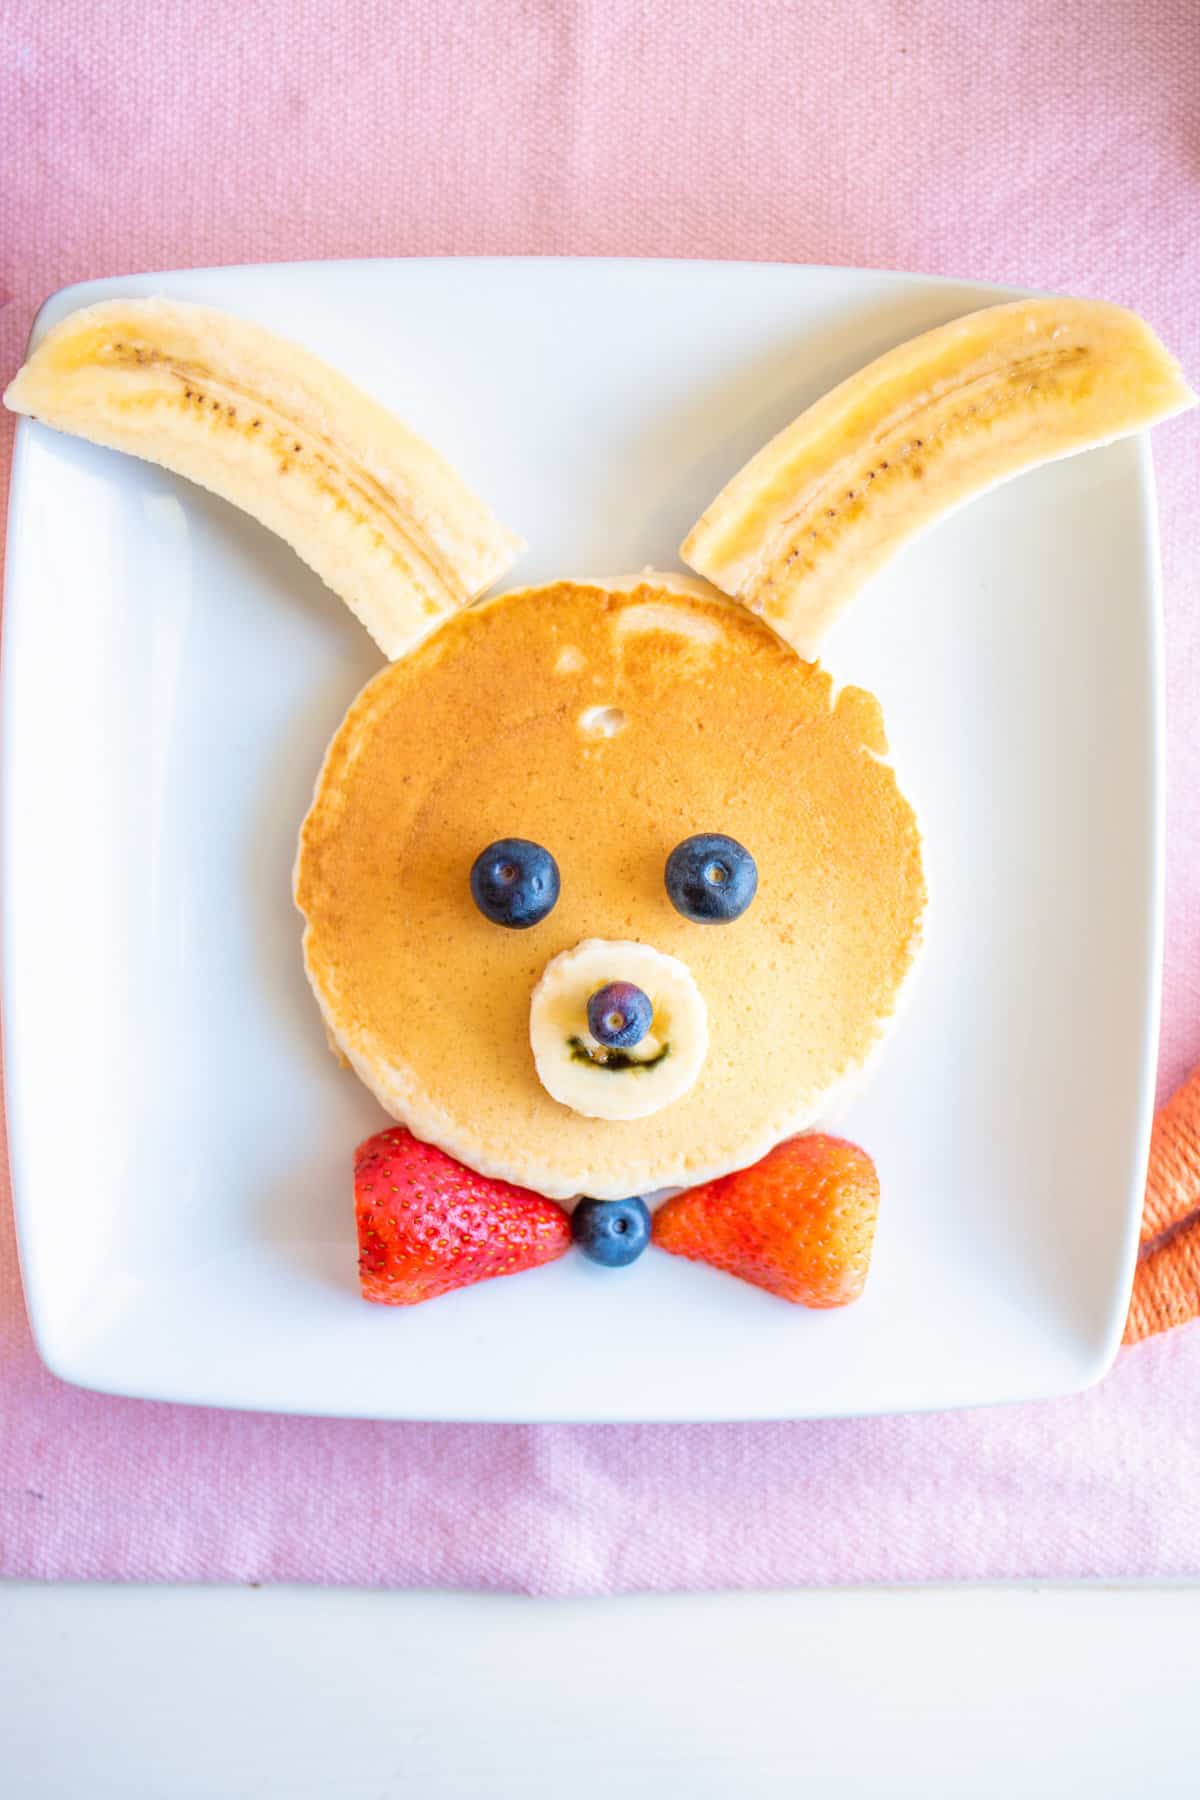 Bunny pancakes made with a large pancake and decorated with banana, strawberry, and blueberries.